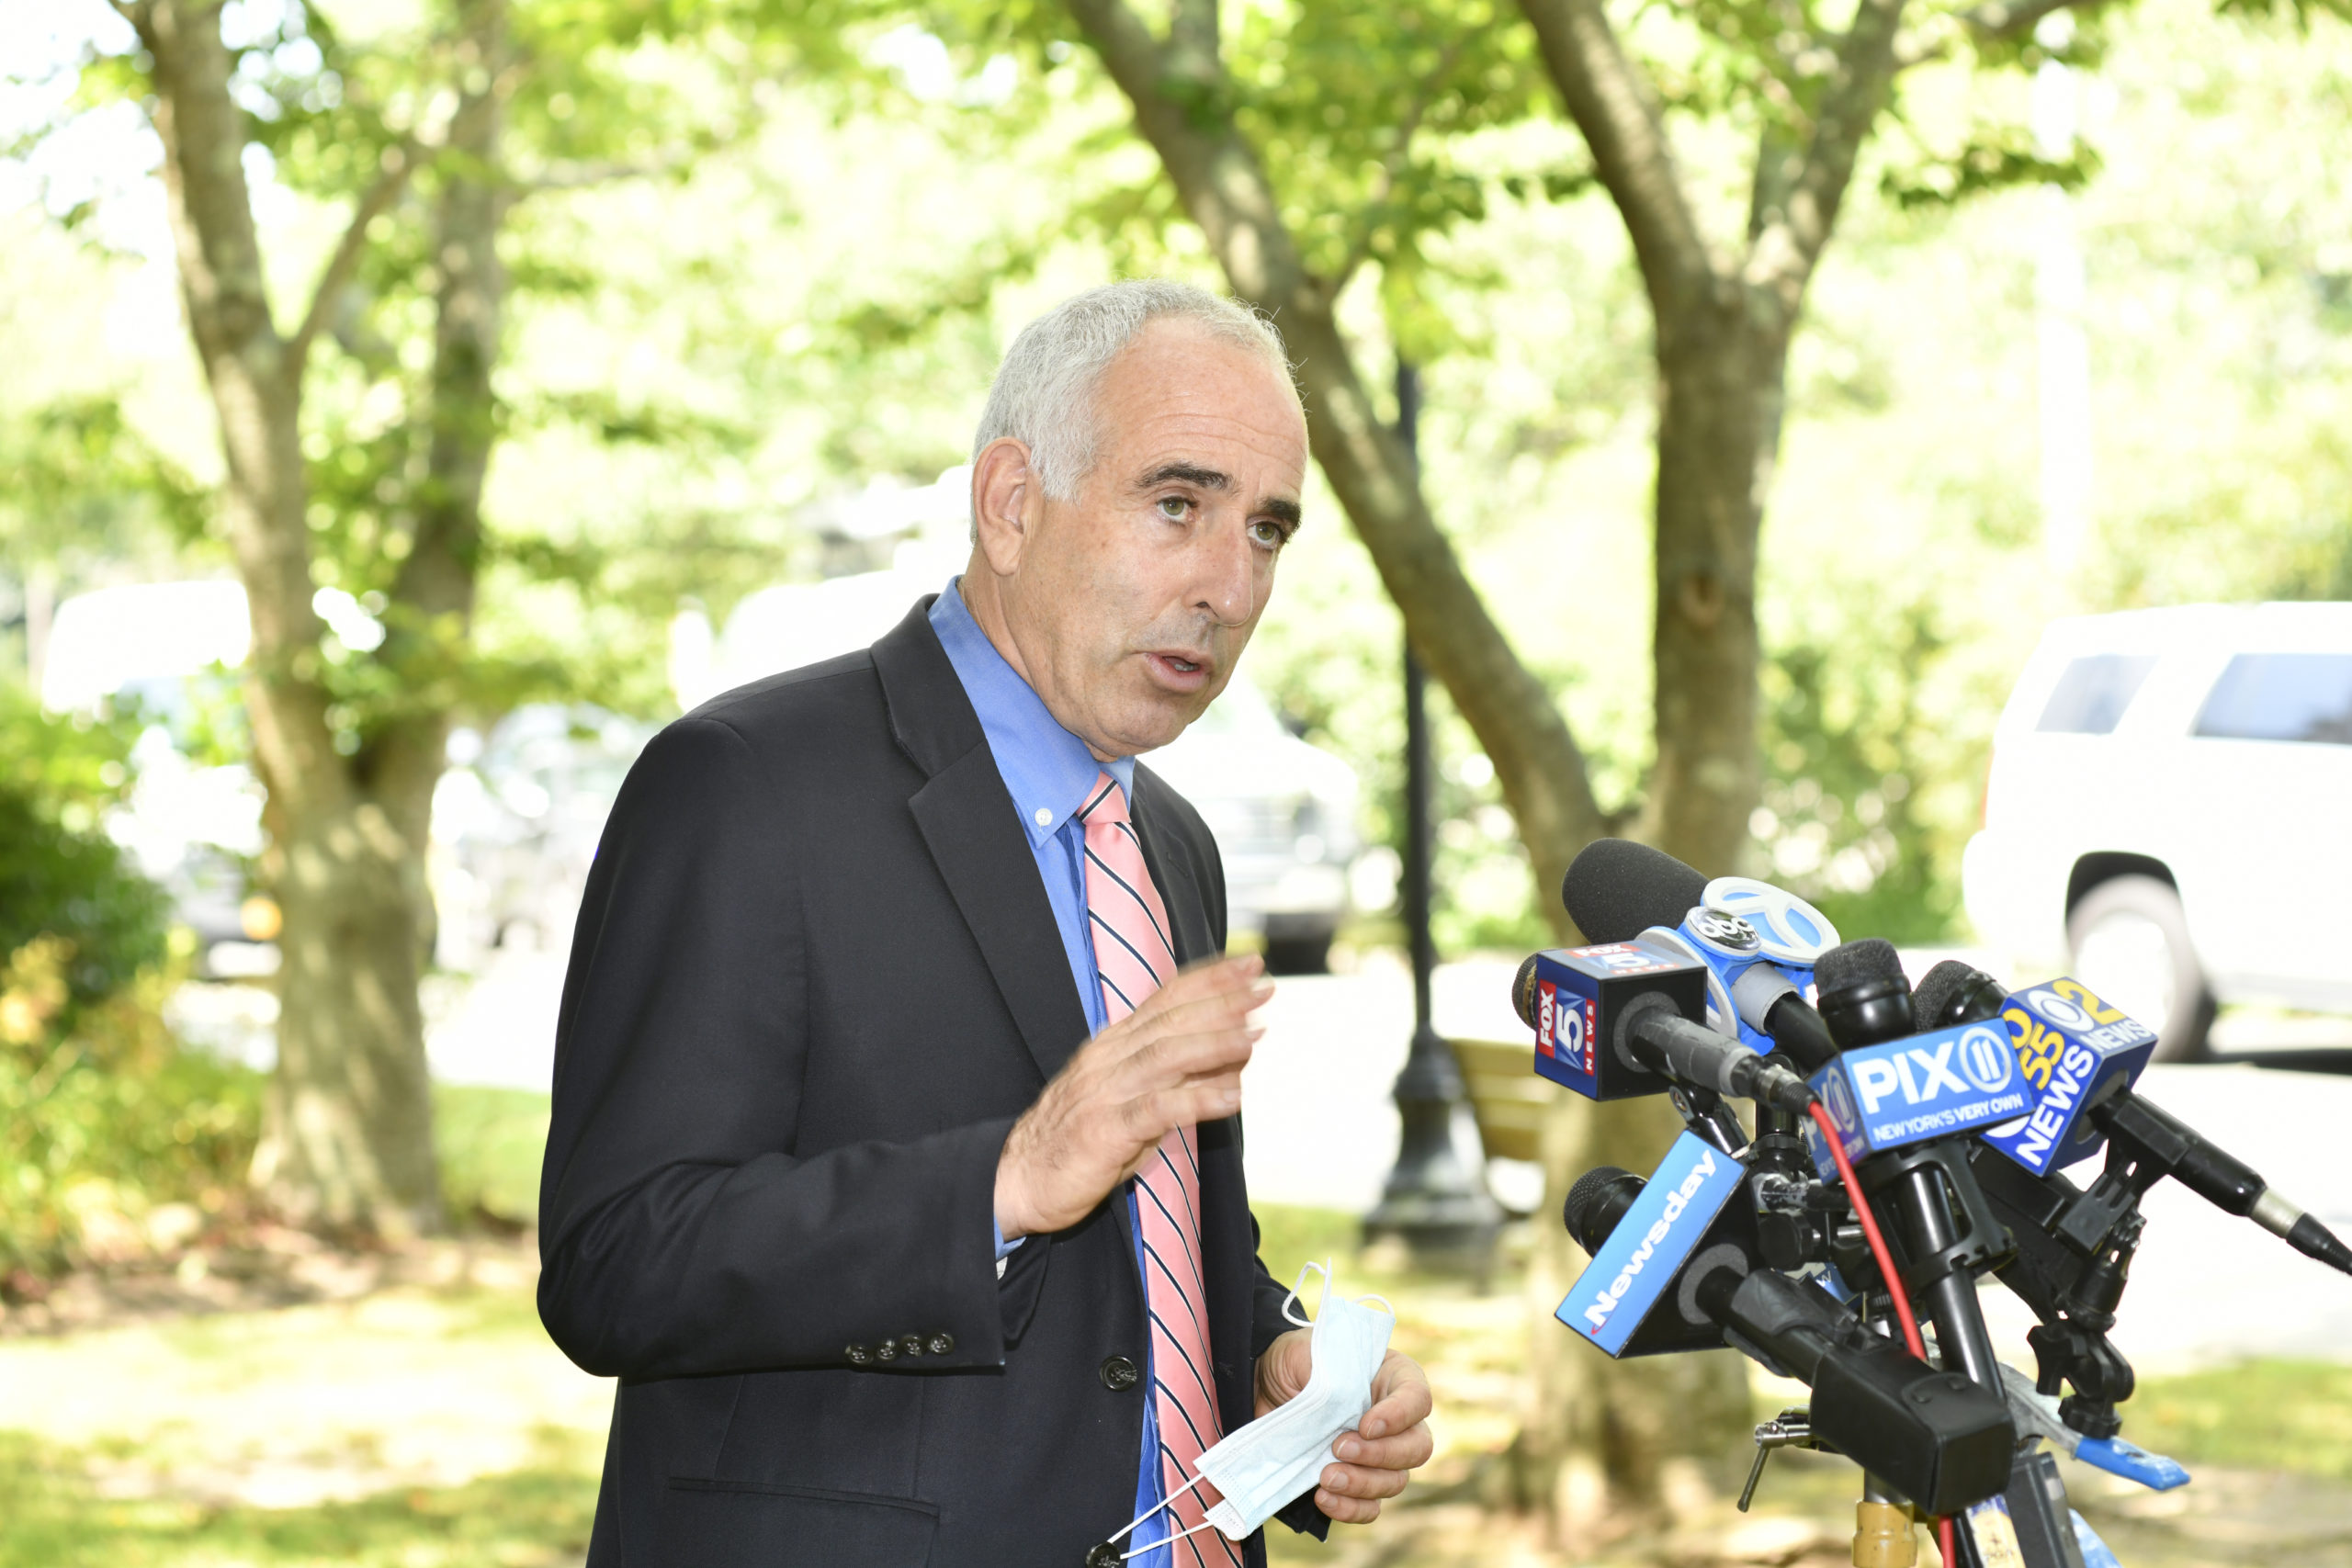 Southampton Town Supervisor Jay Schneiderman at a press conference at town hall on Tuesday, July 28.  DANA SHAW